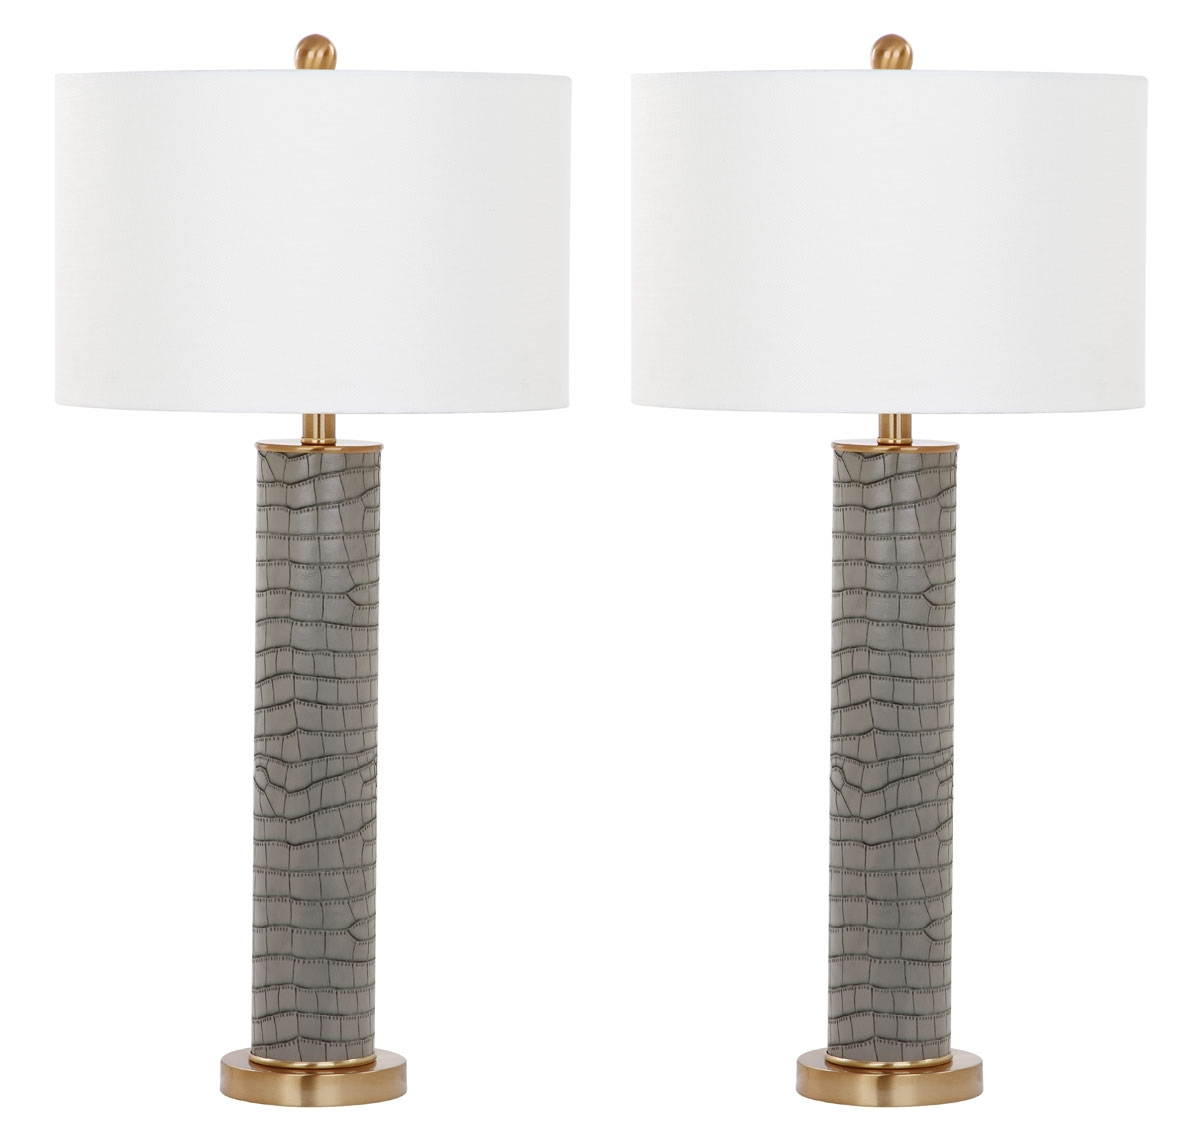 Ollie 31.5-Inch H Faux Alligator Table Lamp - Grey - Safavieh - Image 1